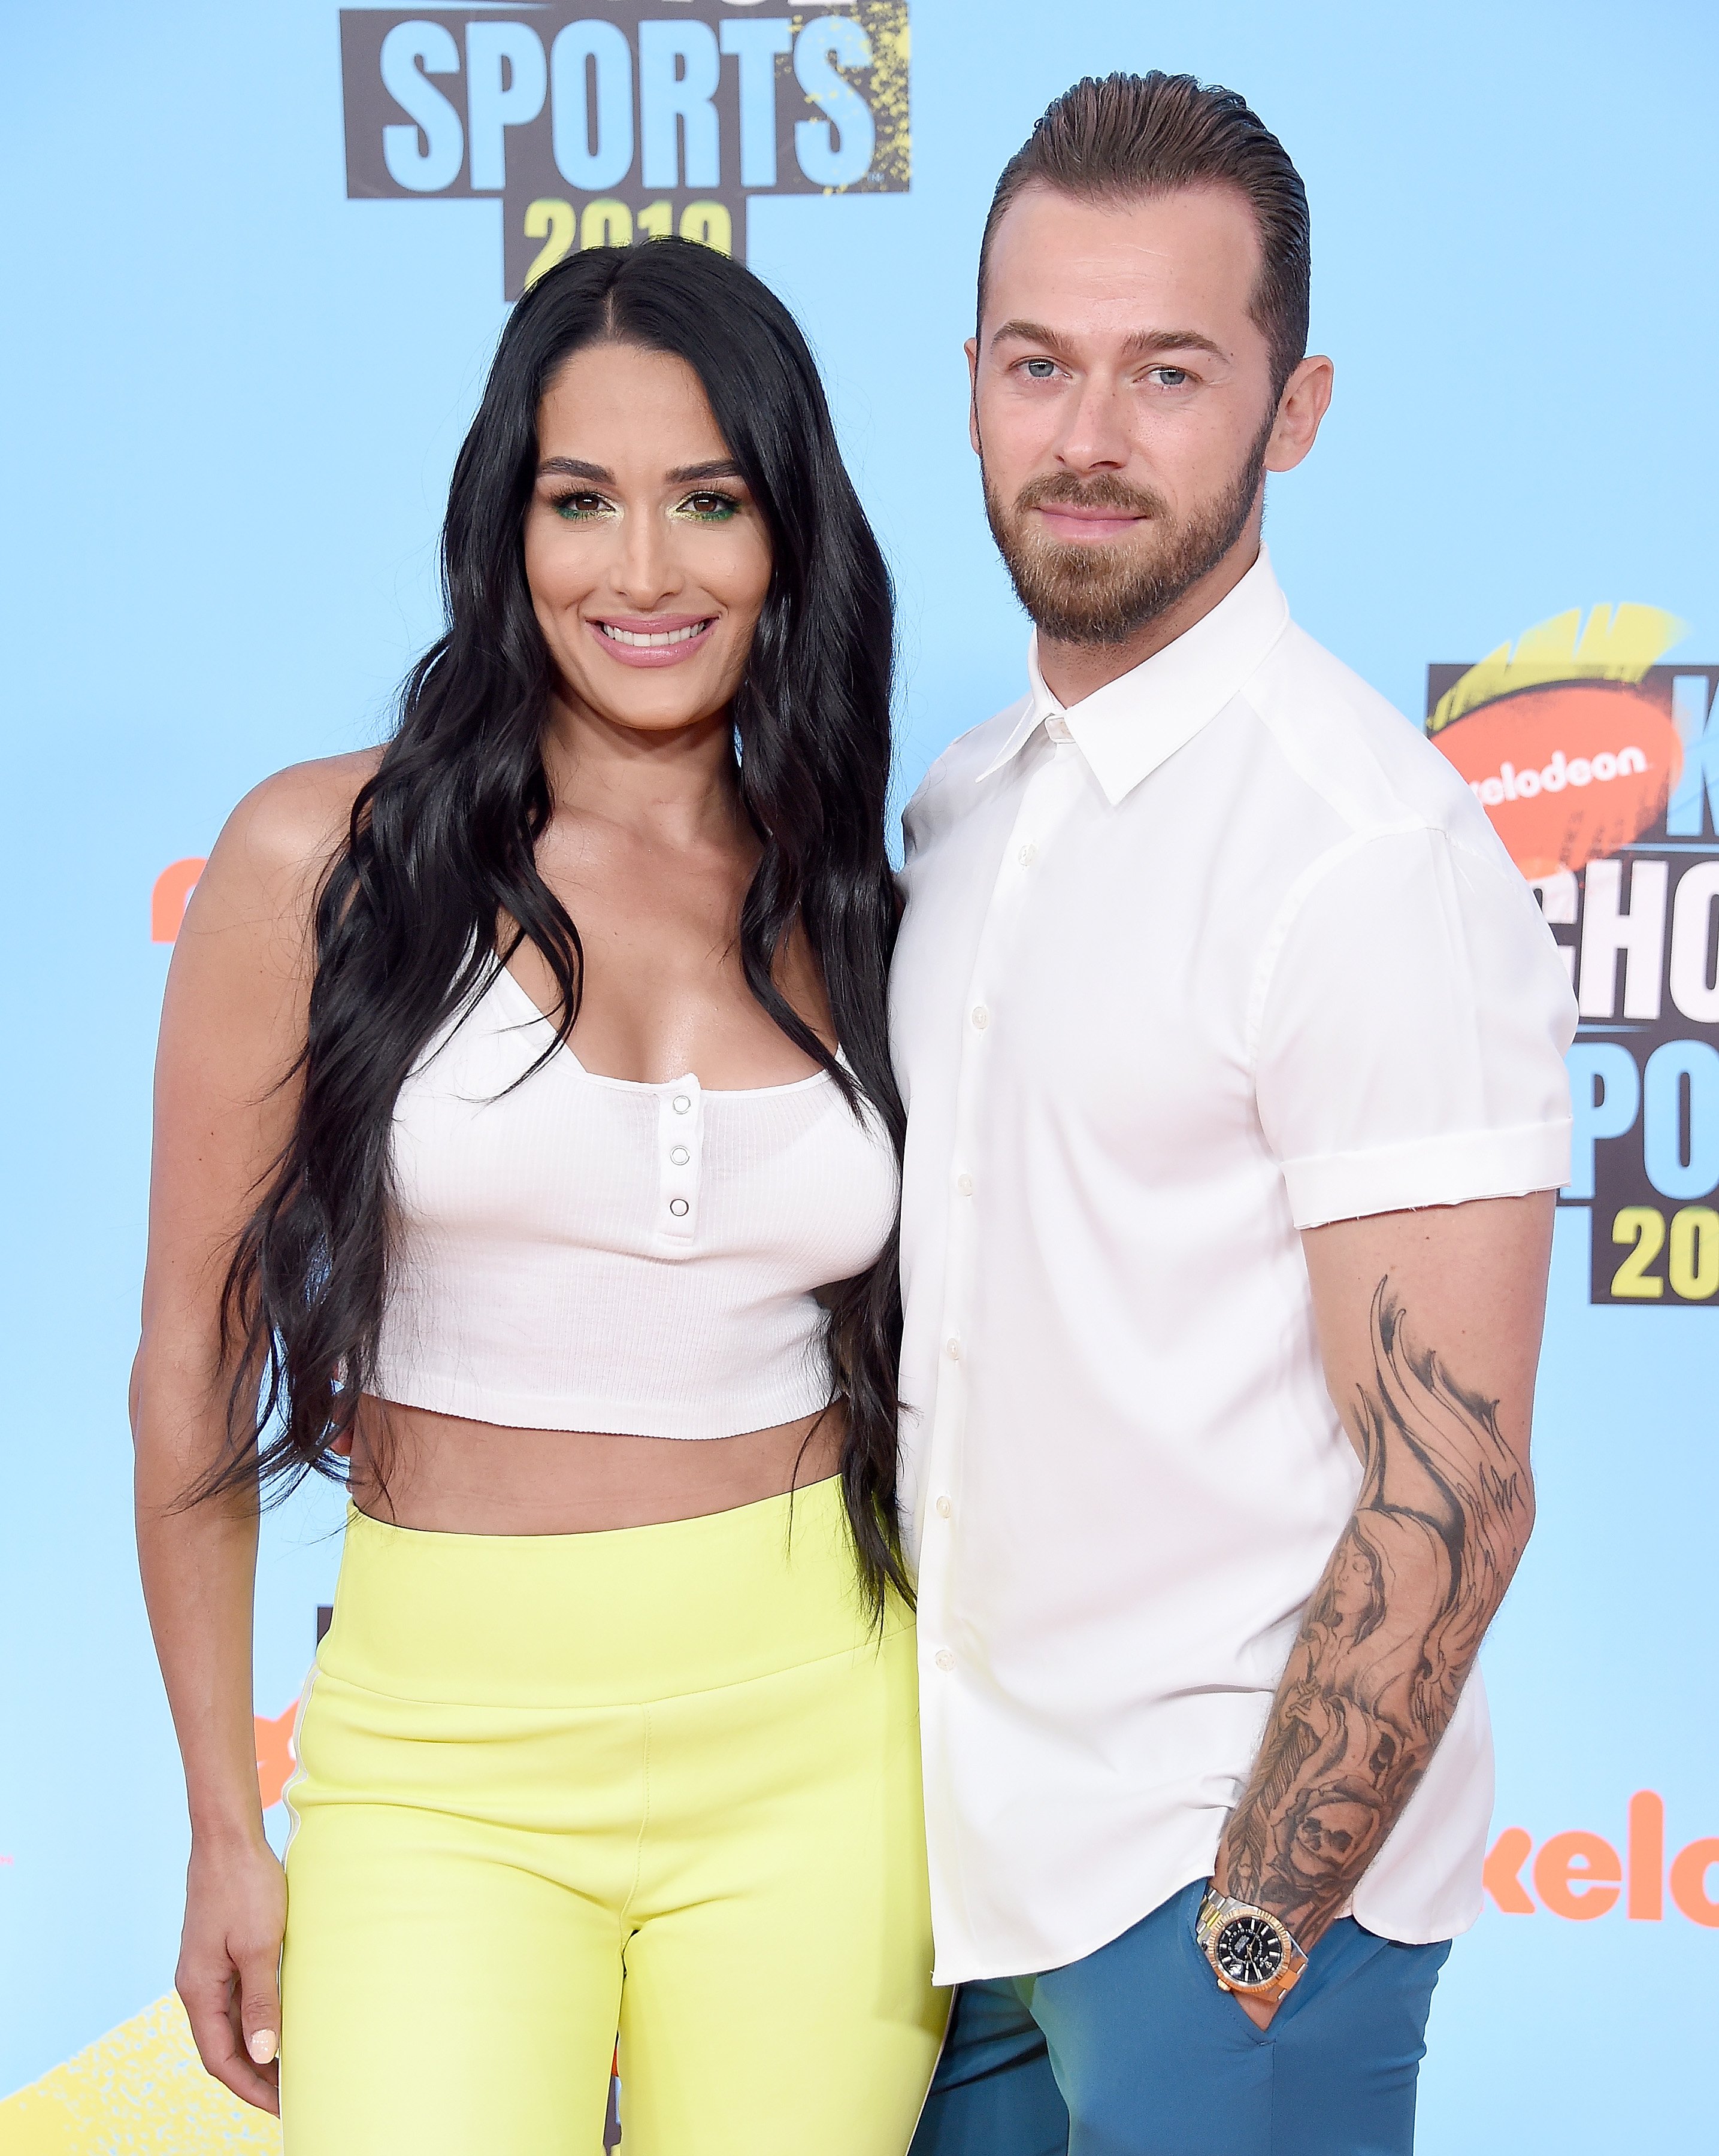 Nikki Bella and Artem Chigvintsev attend Nickelodeon Kids' Choice Sports in Santa Monica, California on July 11, 2019 | Photo: Getty Images